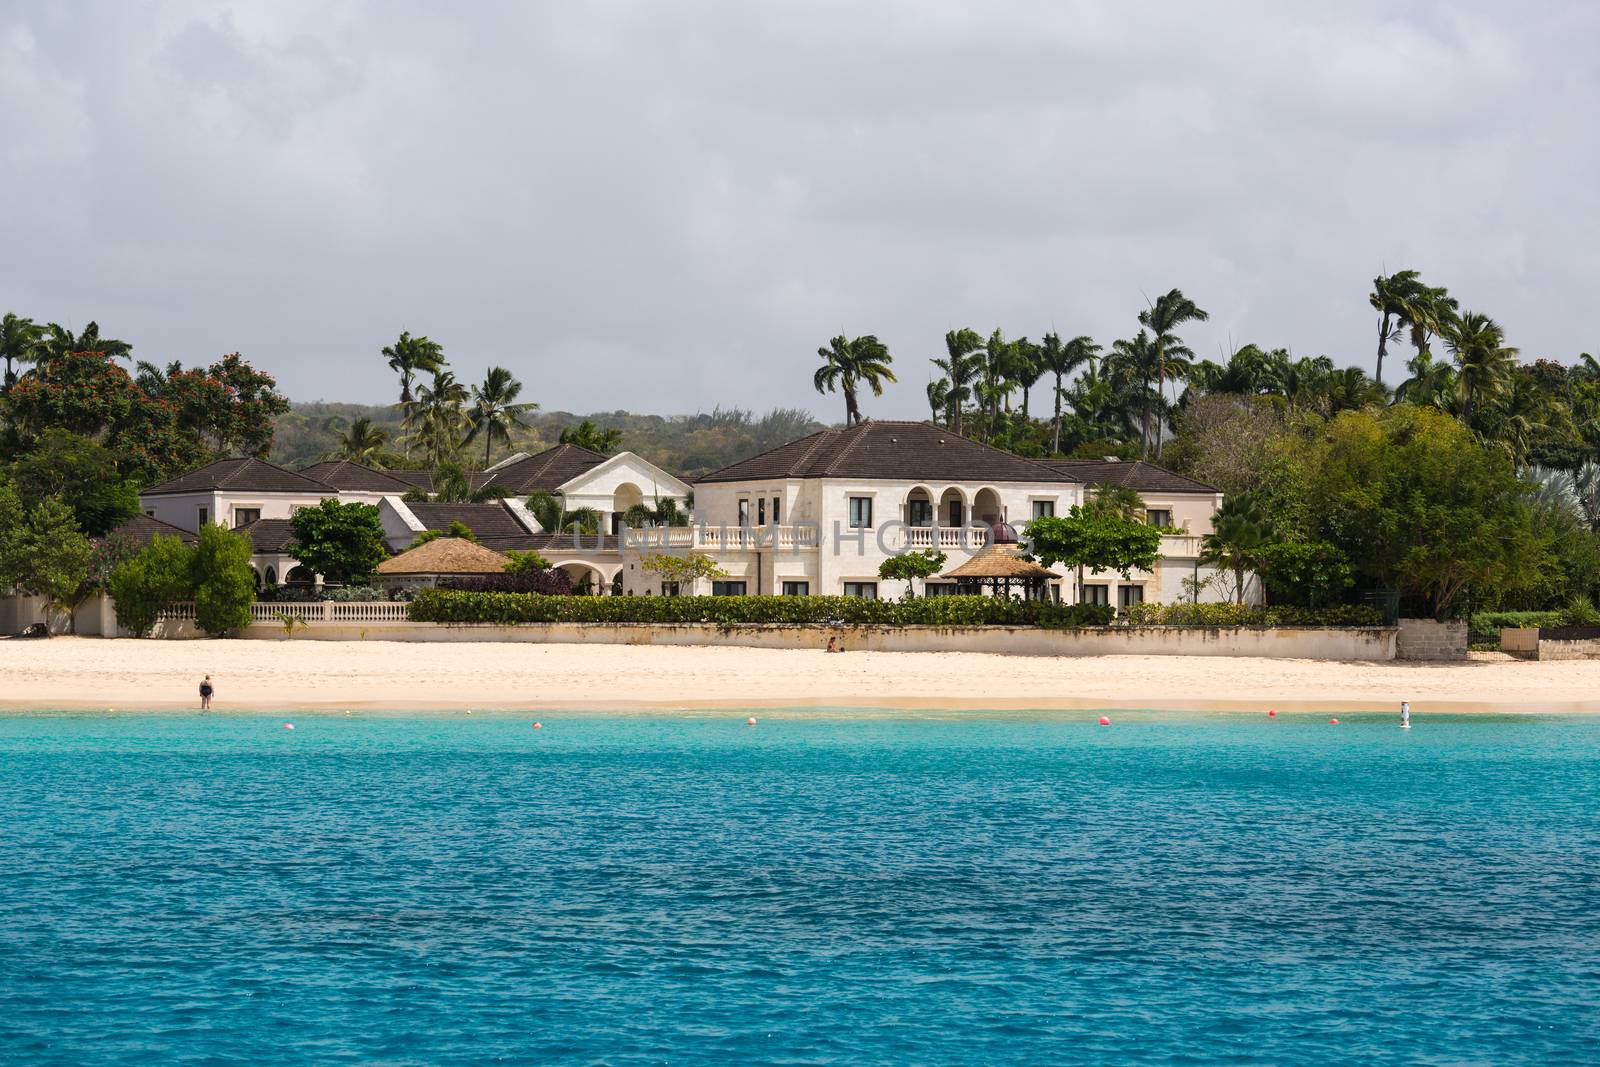 Residences as seen from a catamaran off the coastline of Barbados